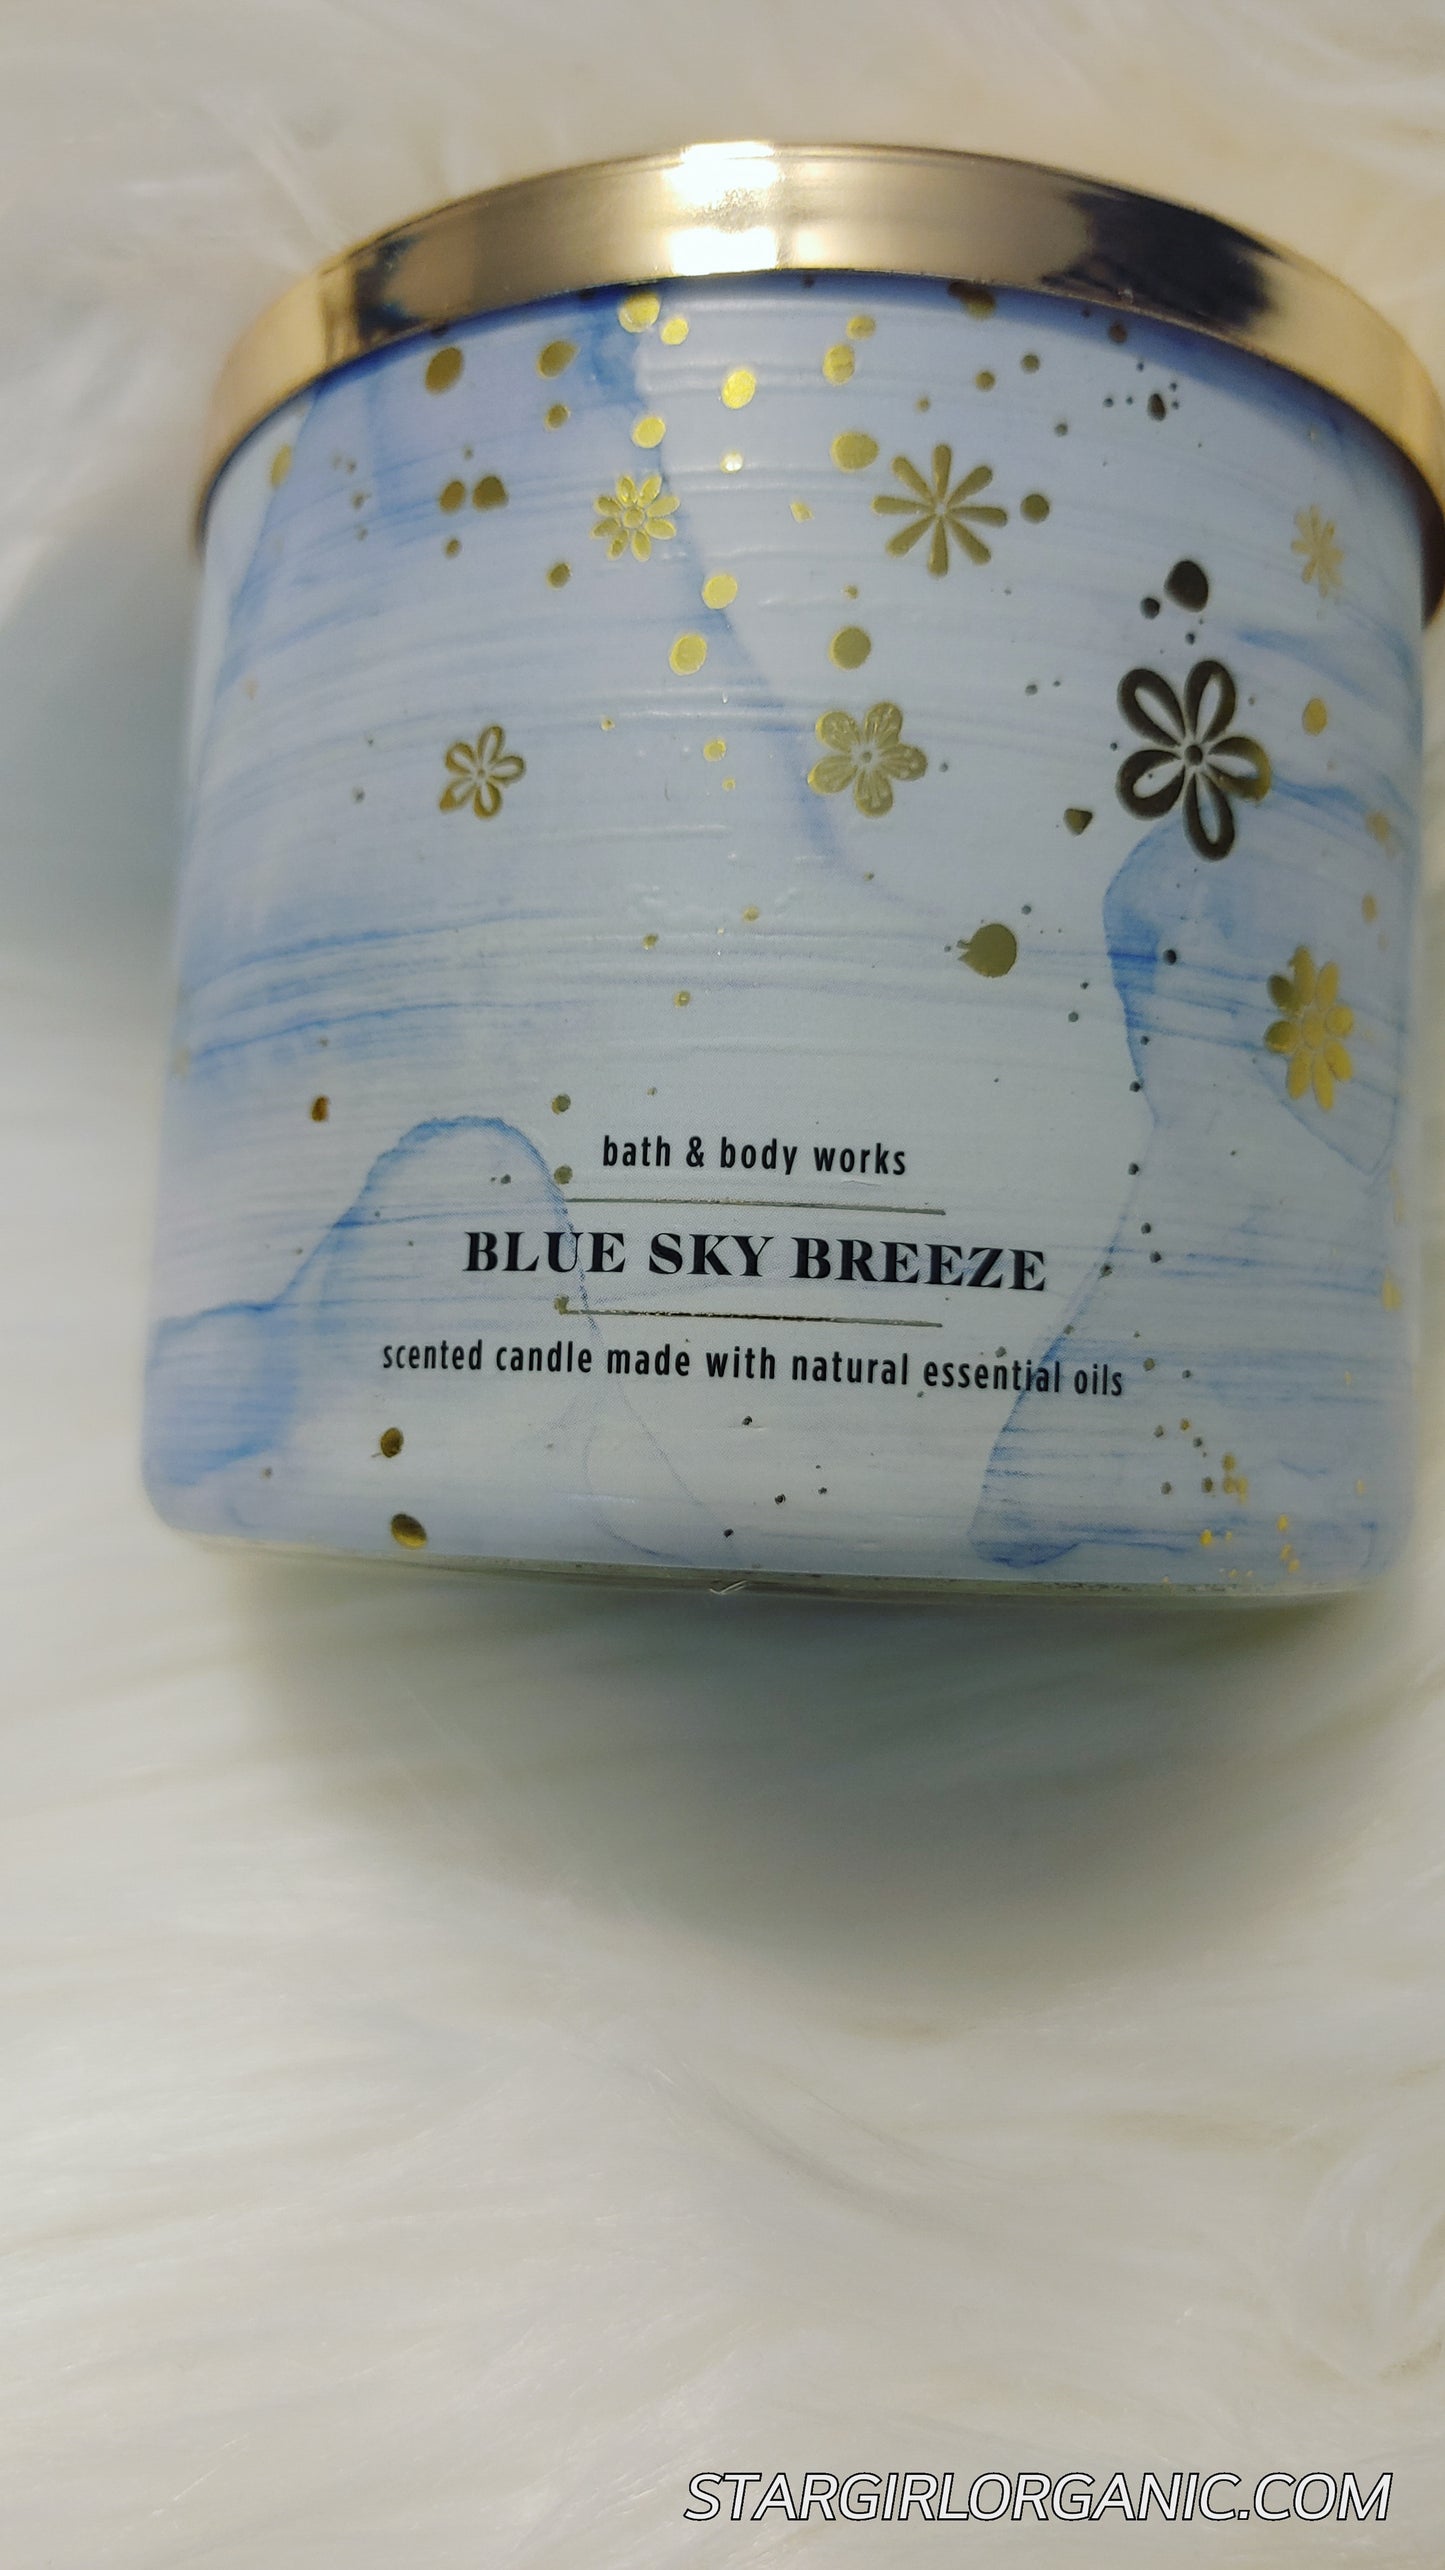 Bath & Body Works Blue Sky Breeze 3 Wick Scented Candle Made with Natural Essential Oil